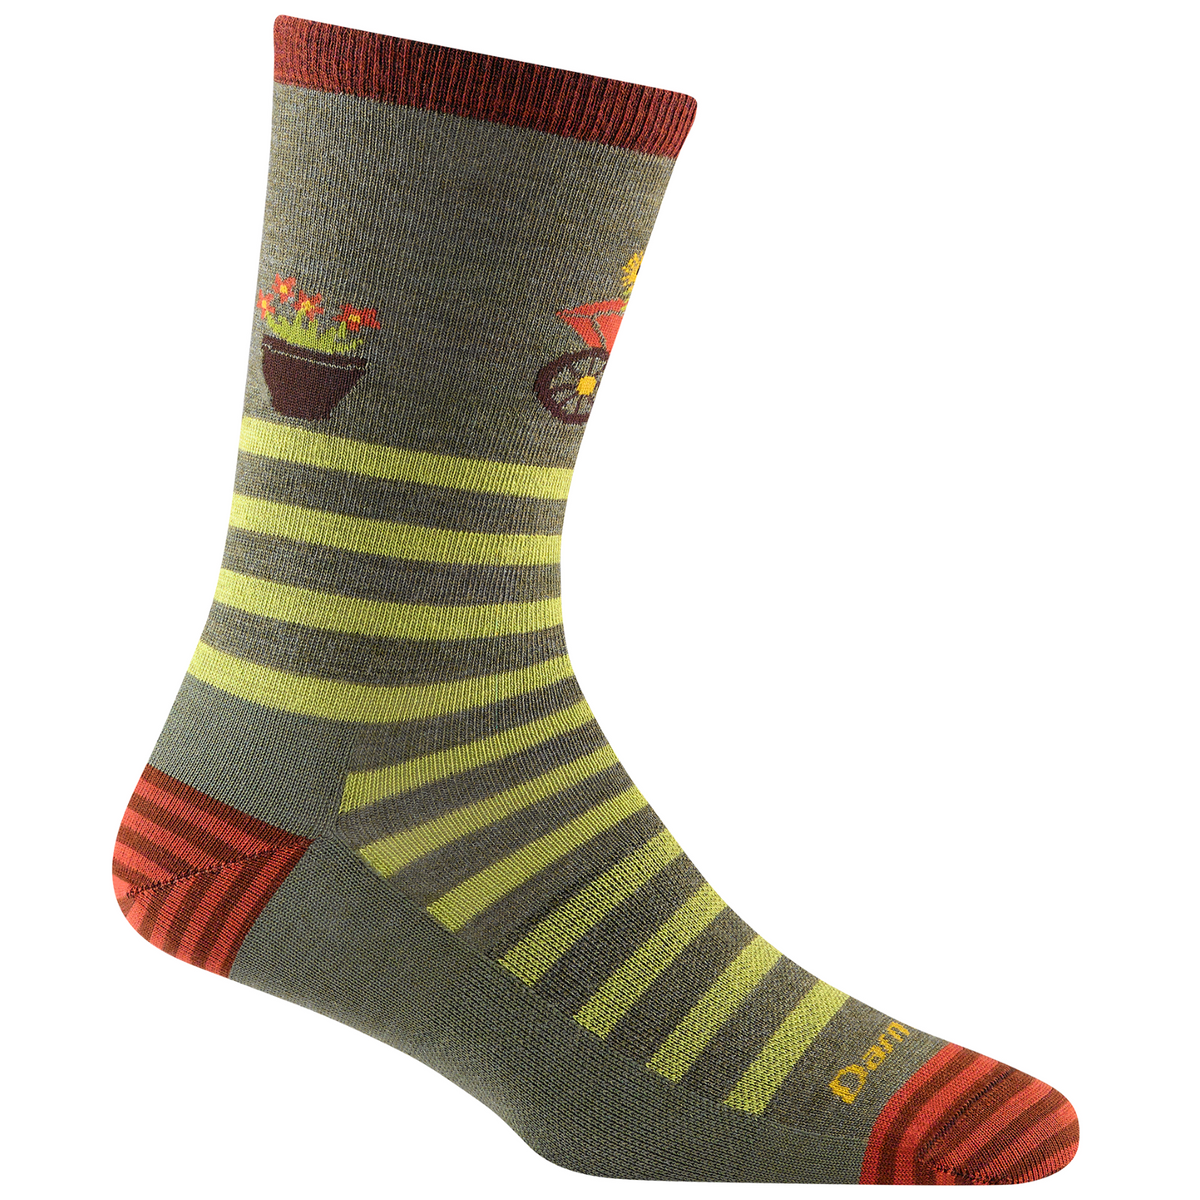 Darn Tough 6037 Animal Haus Lightweight Cushion Crew women&#39;s sock featuring olive green sock with green stripes and yellow dog with wheelbarrow of sunflowers at top. Sock shown on display foot. 